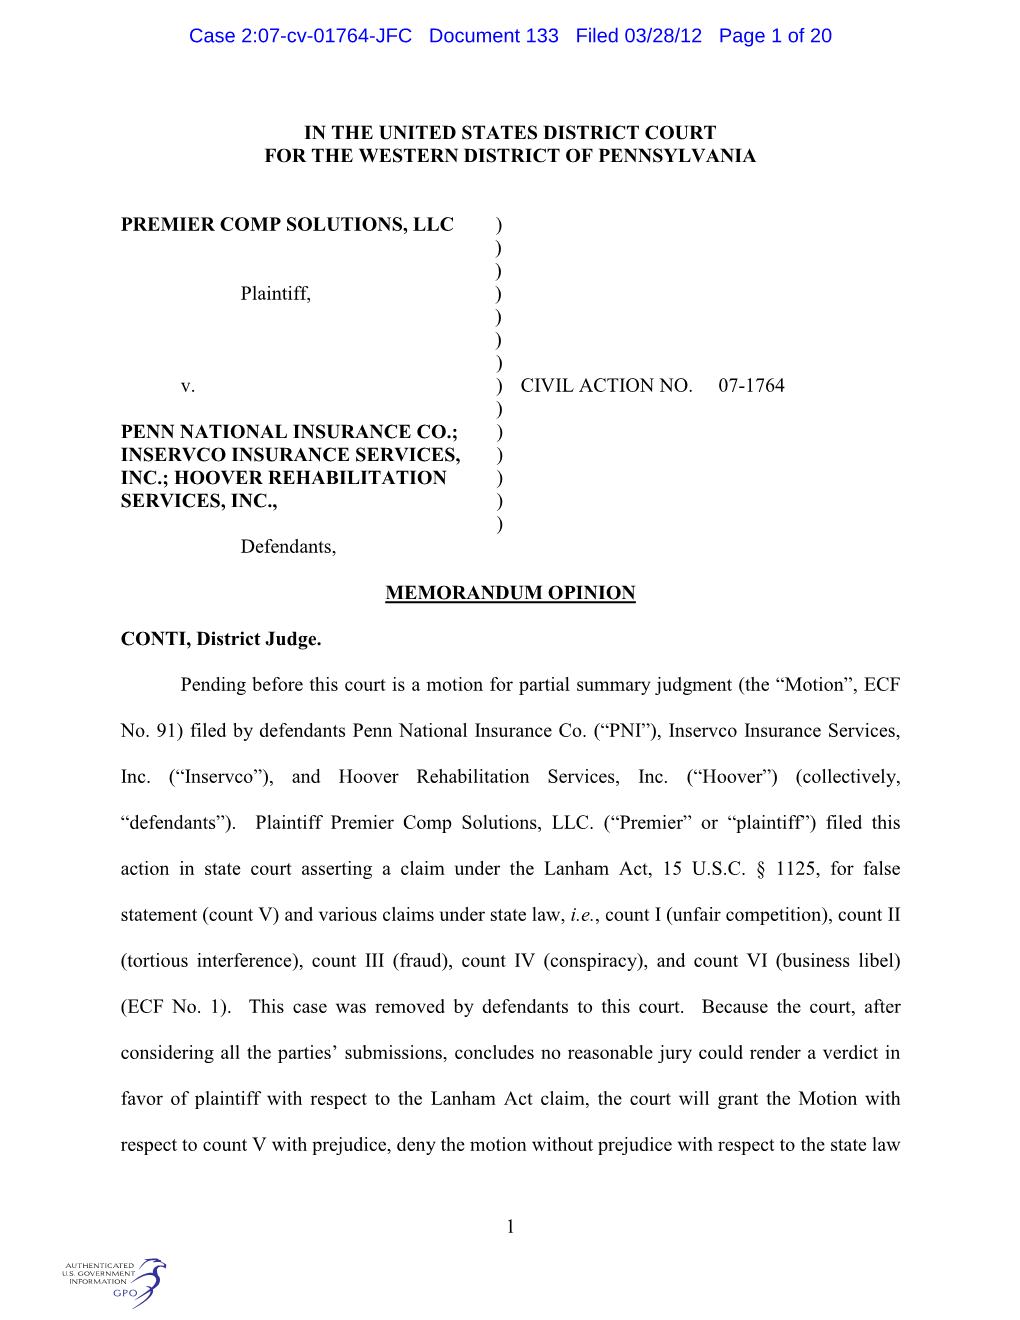 Case 2:07-Cv-01764-JFC Document 133 Filed 03/28/12 Page 1 of 20